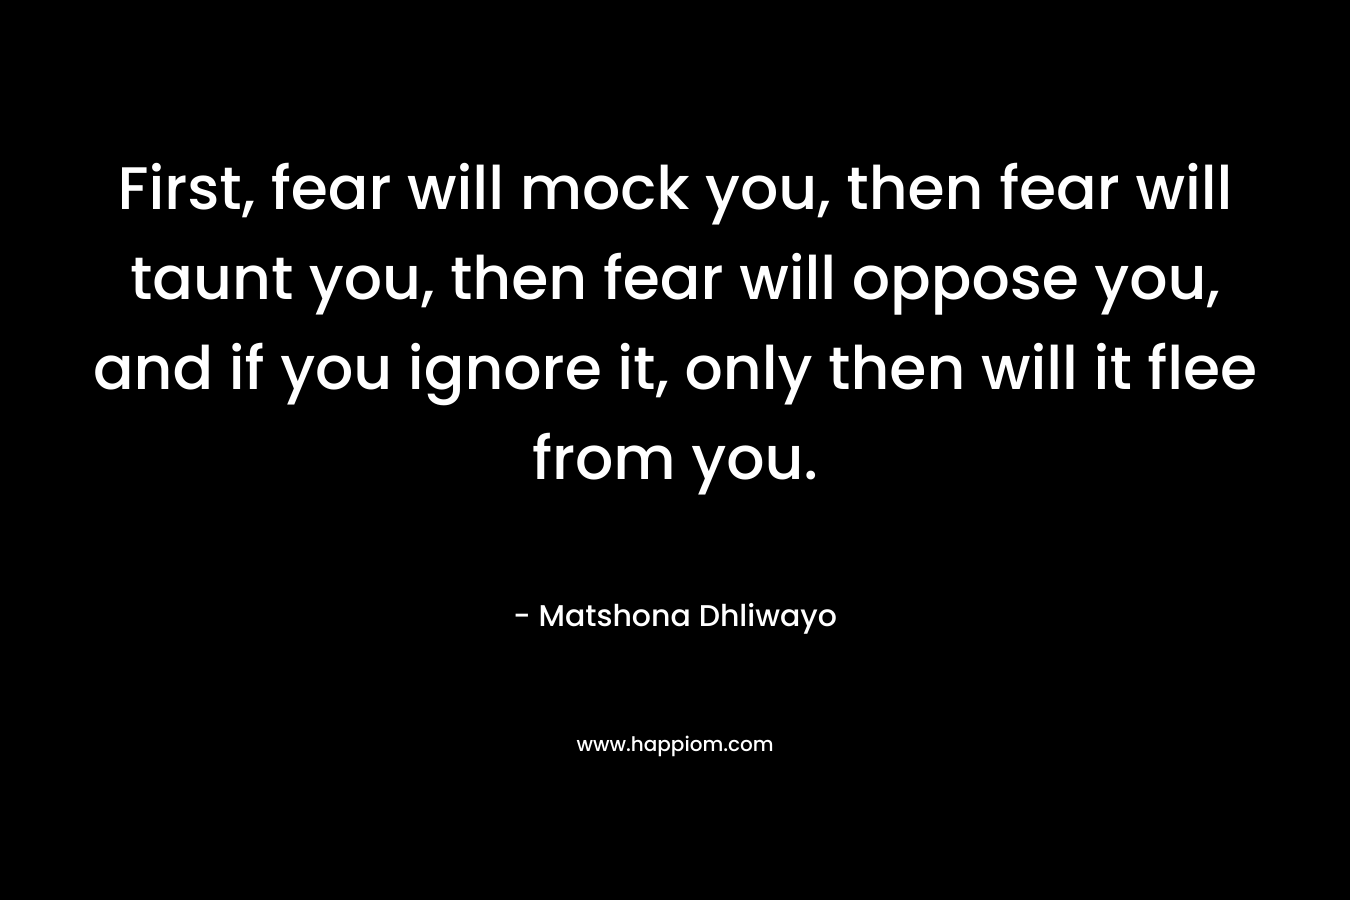 First, fear will mock you, then fear will taunt you, then fear will oppose you, and if you ignore it, only then will it flee from you.